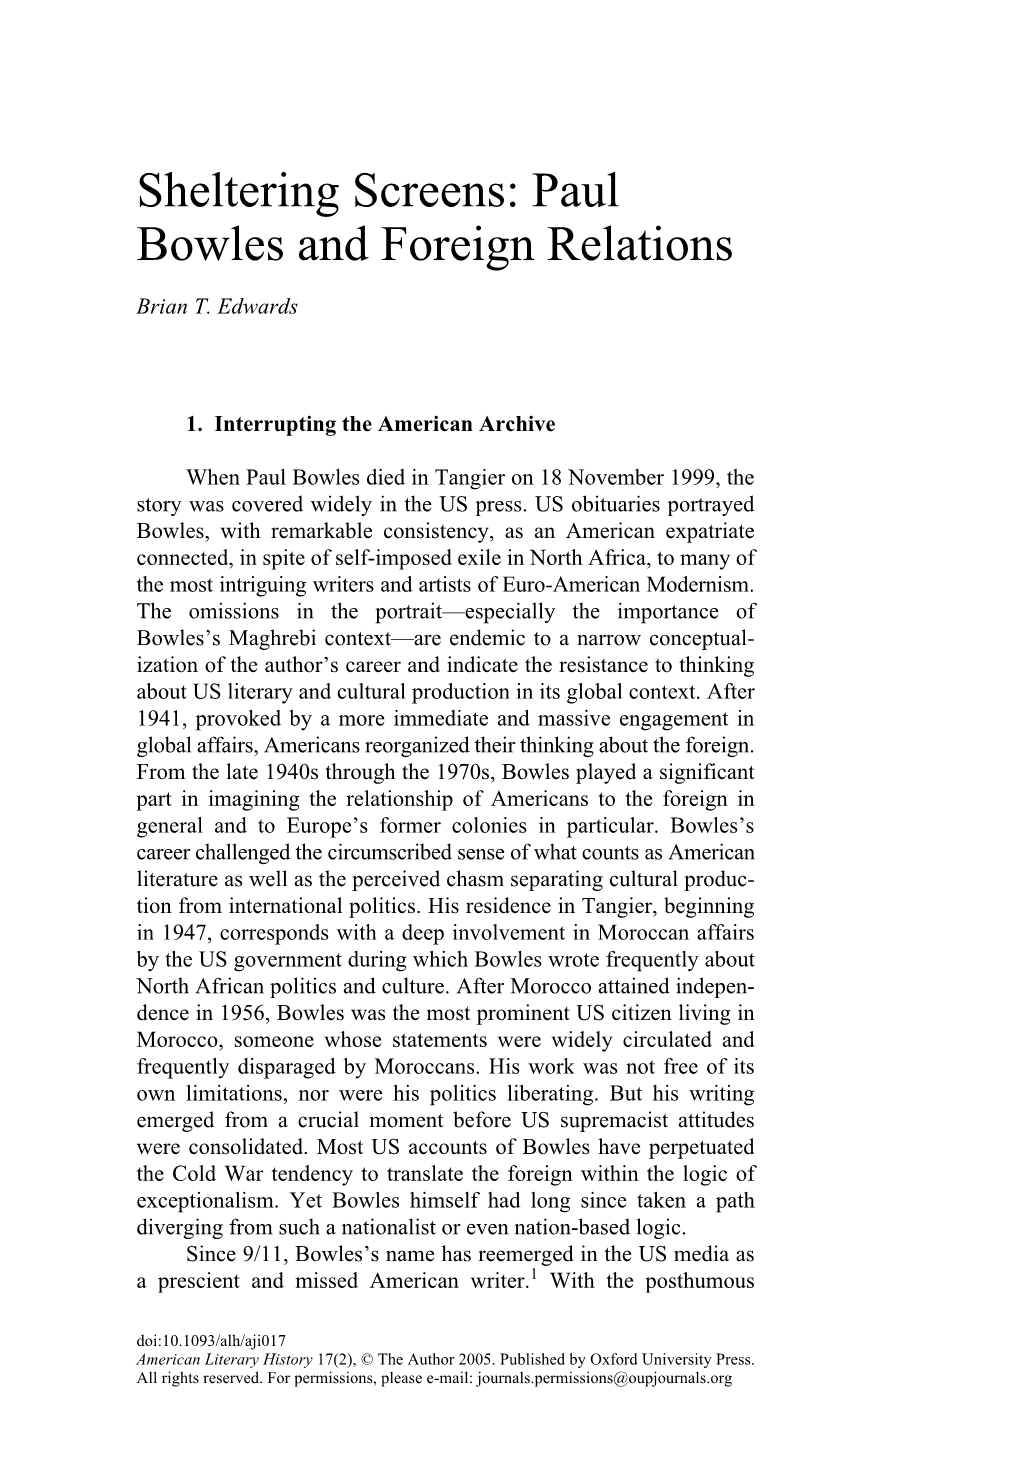 Sheltering Screens: Paul Bowles and Foreign Relations